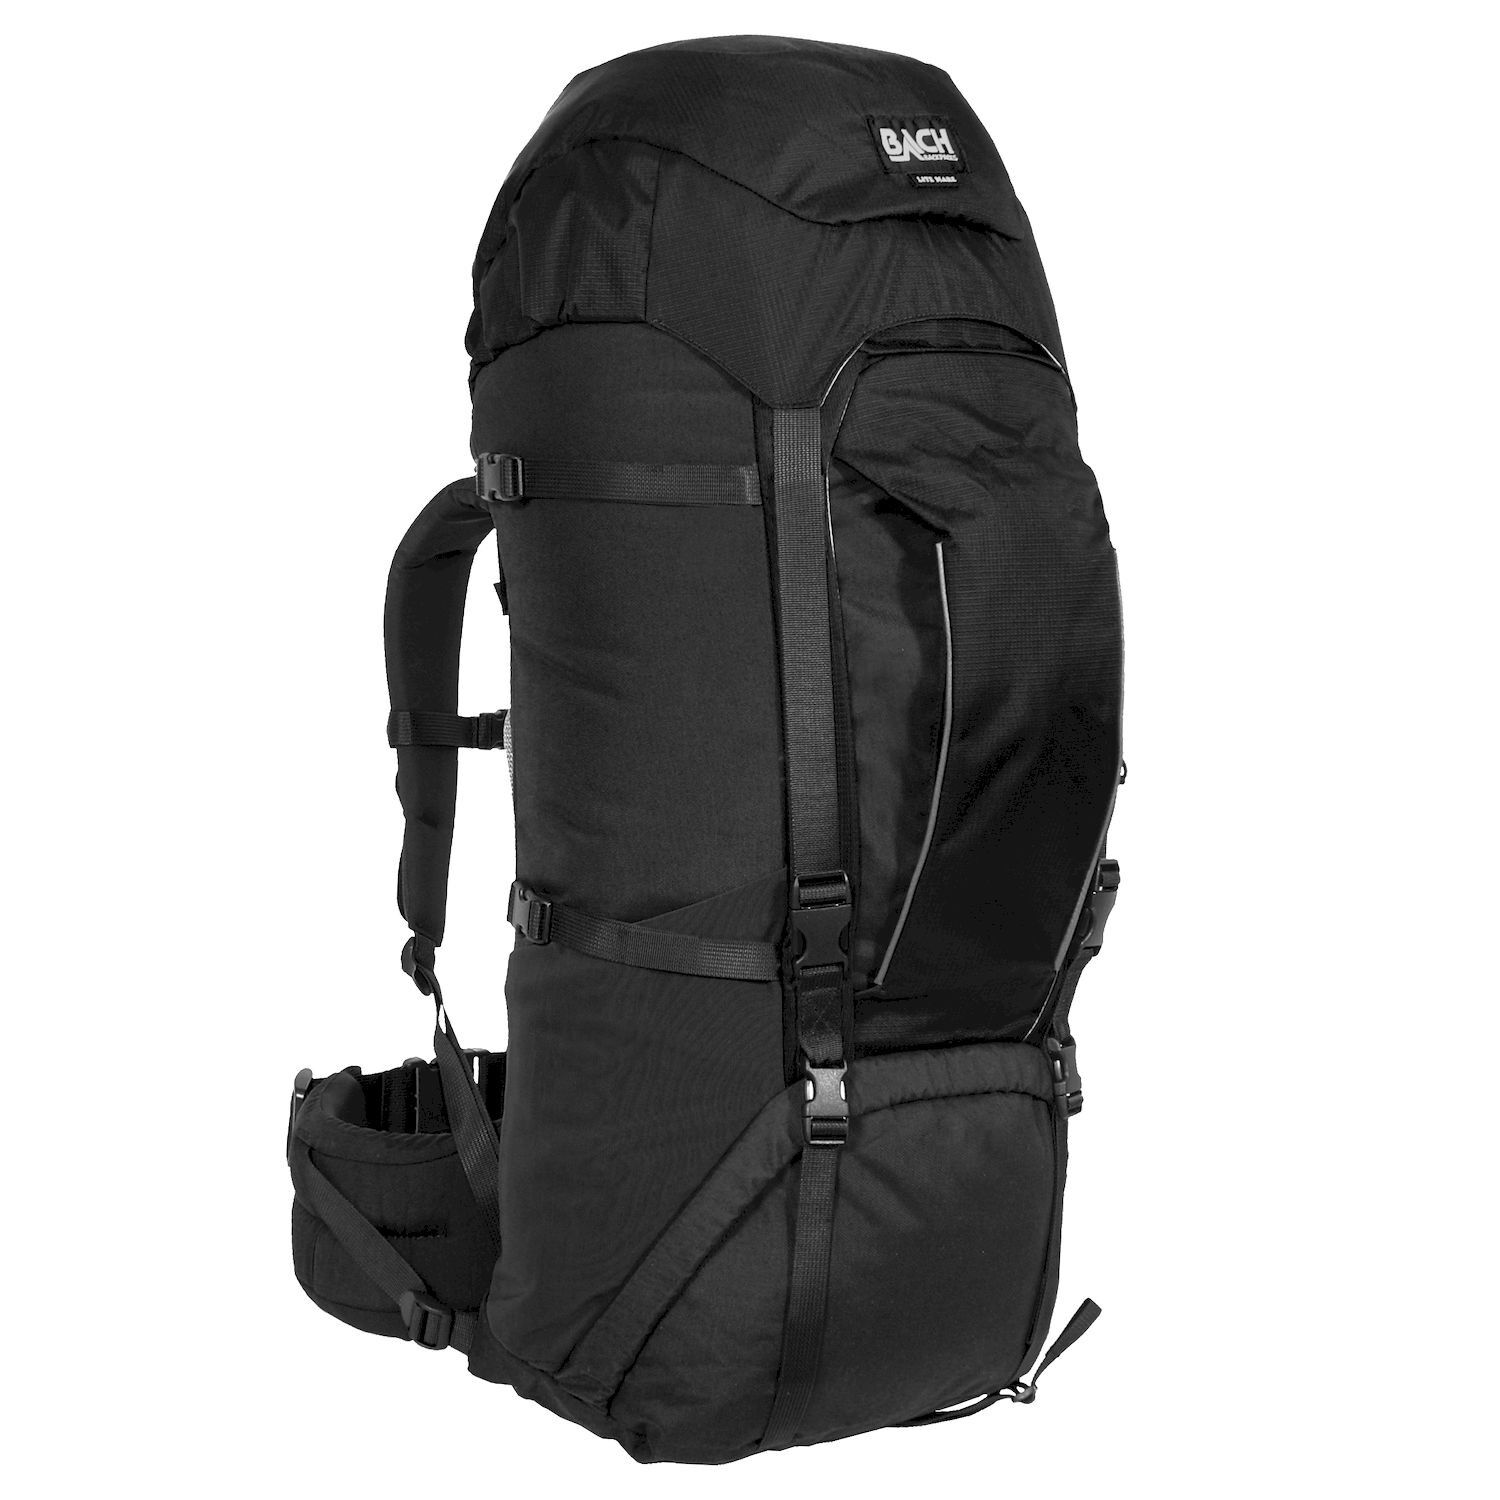 Bach Lite Mare 60 - Hiking backpack - Women's